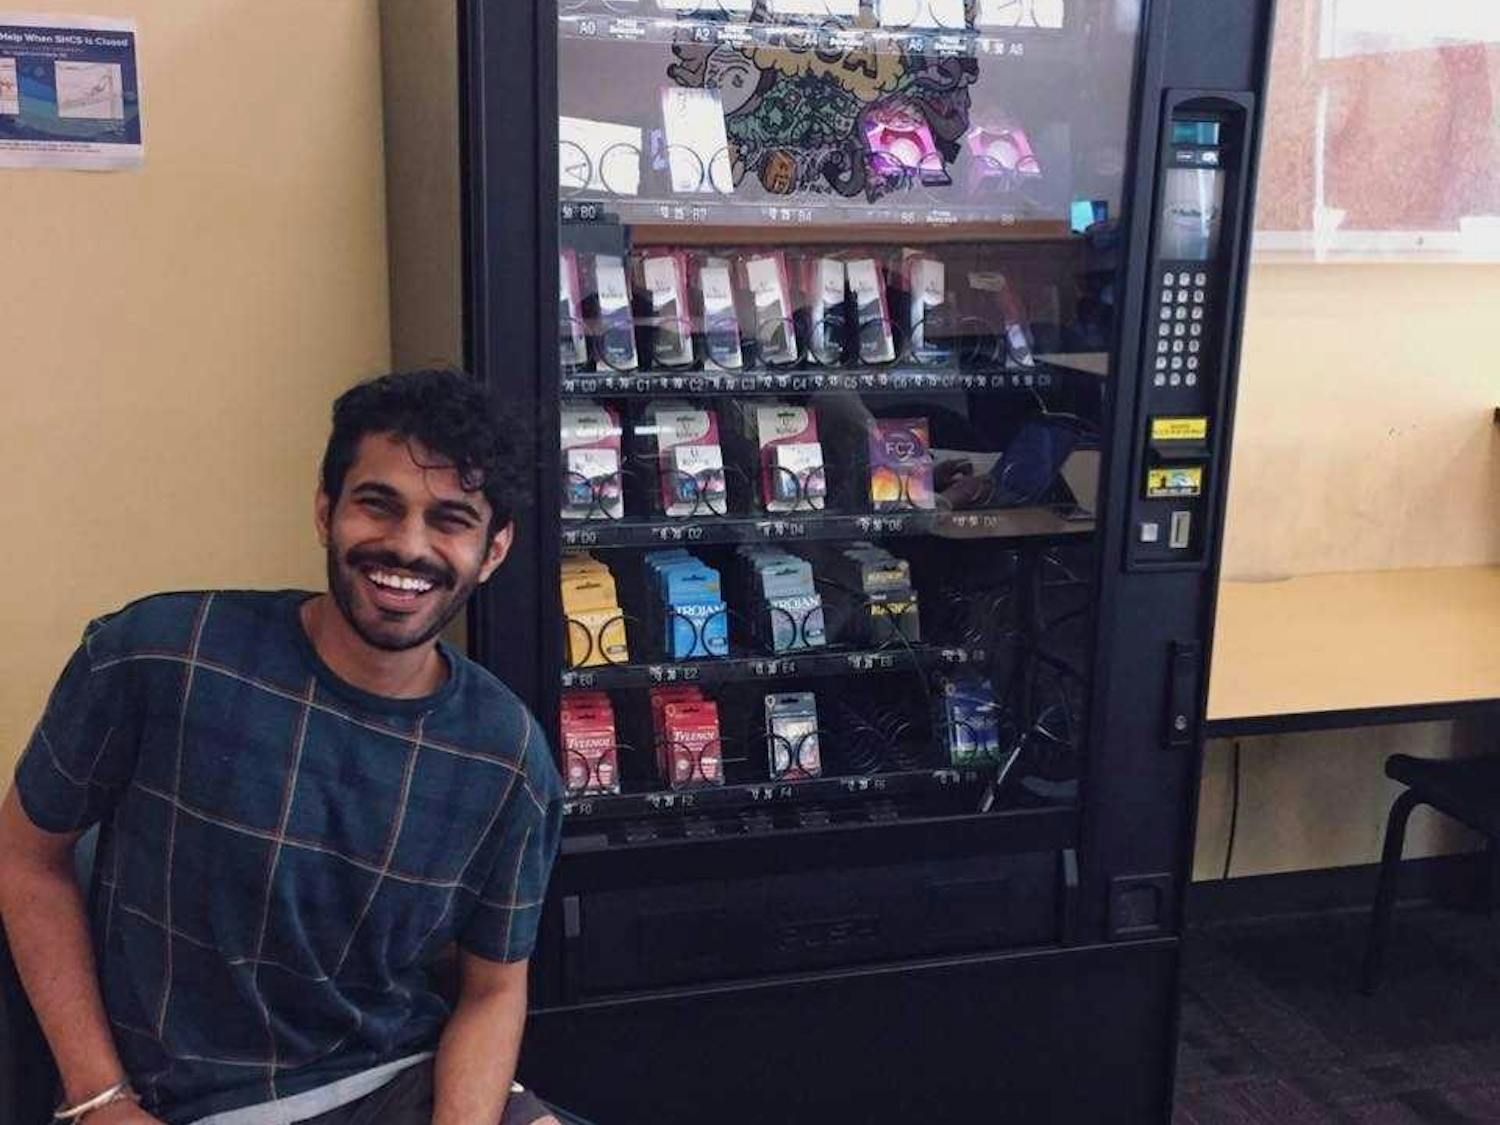 Parteek Singh poses next to the first emergency contraception vending machine at the University of California, Davis. Singh spearheaded the push for the implementation of the machines. Photo courtesy of Singh.